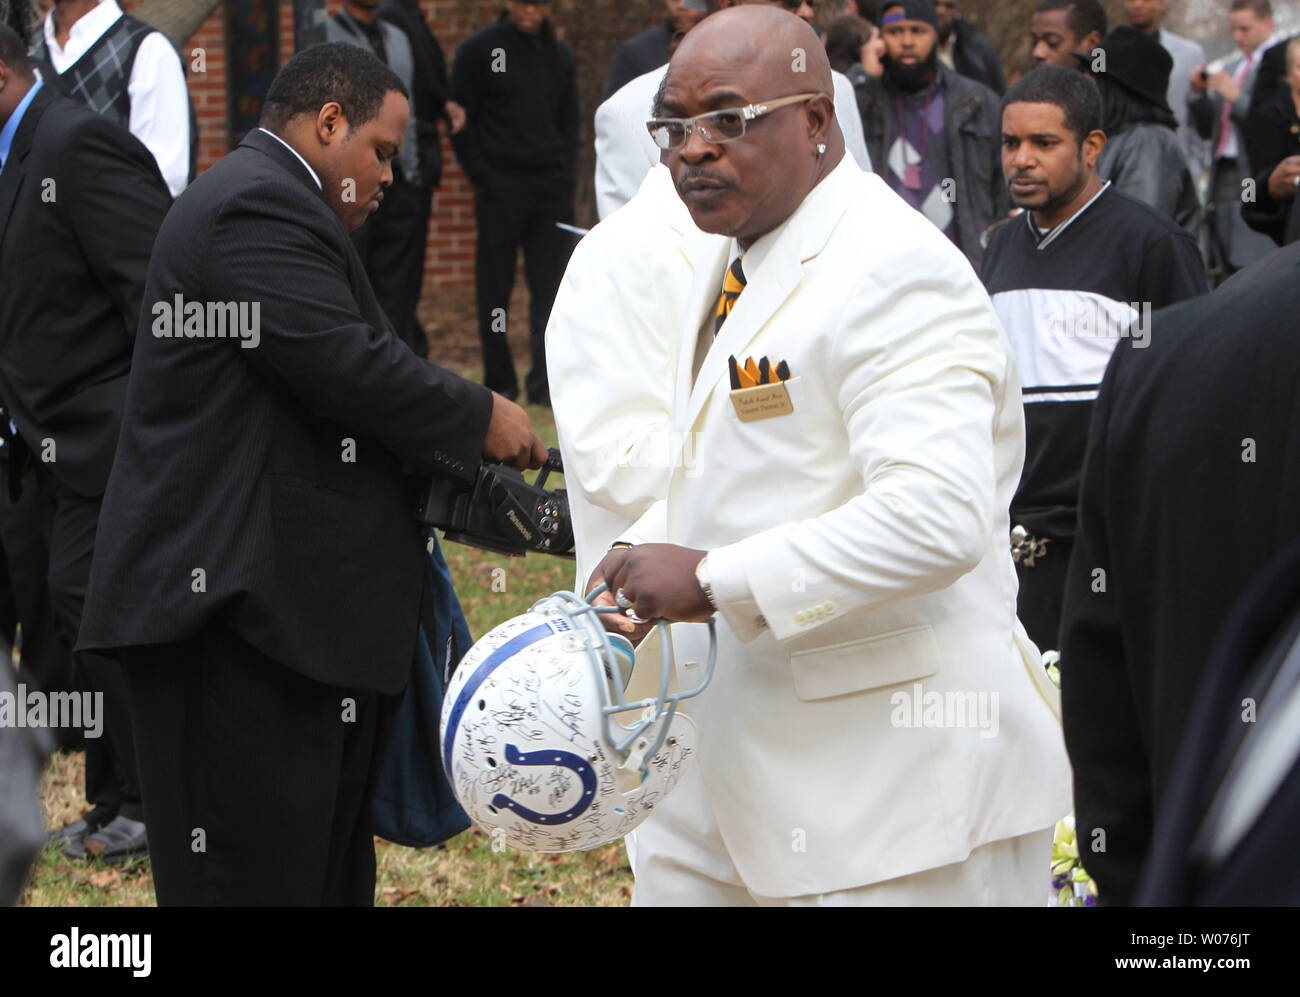 Vincent Thomas Sr. of the Reliable Funeral Directors, removes an autographed Indianapolis Colts helmet from atop the casket of Jerry Brown, Jr. during his funeral at the Hopewell Missionary Baptist Church in St. Louis on December 15, 2012. The Dallas CowboysÕ practice squad nose tackle was killed in an Irving car accident on December 8, 2012 when his best friend and teammate Josh Brent hit a curb, flipping the vehicle. Brown appeared in just one game for the Indianapolis Colts this season and did not stat.  UPI/Bill Greenblatt Stock Photo